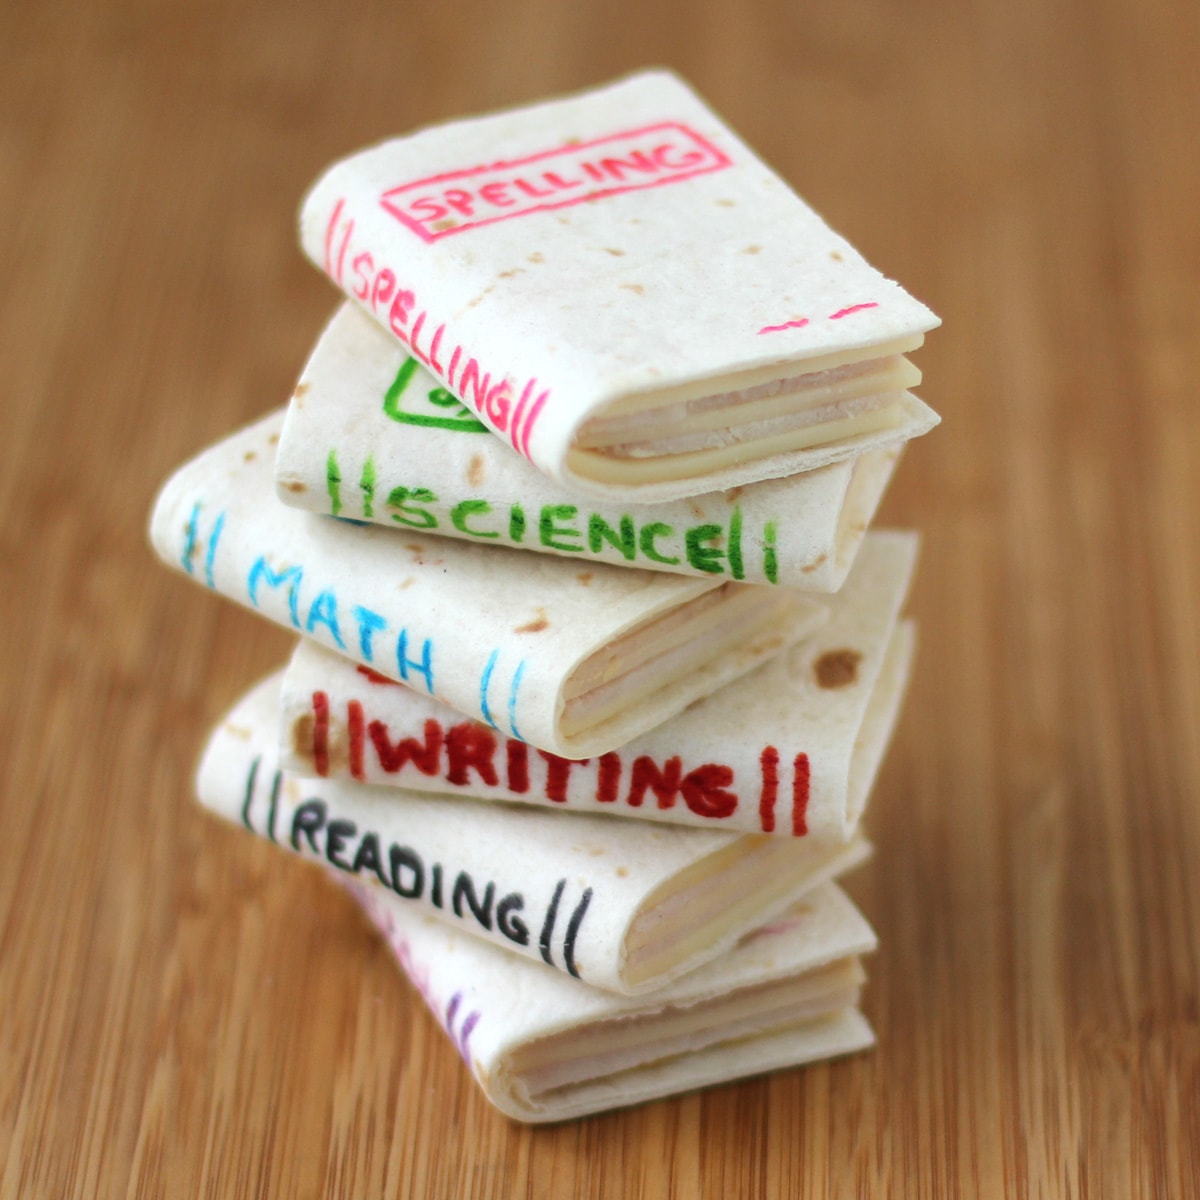 School book sandwiches made with soft tortillas printed with school book titles using food coloring .